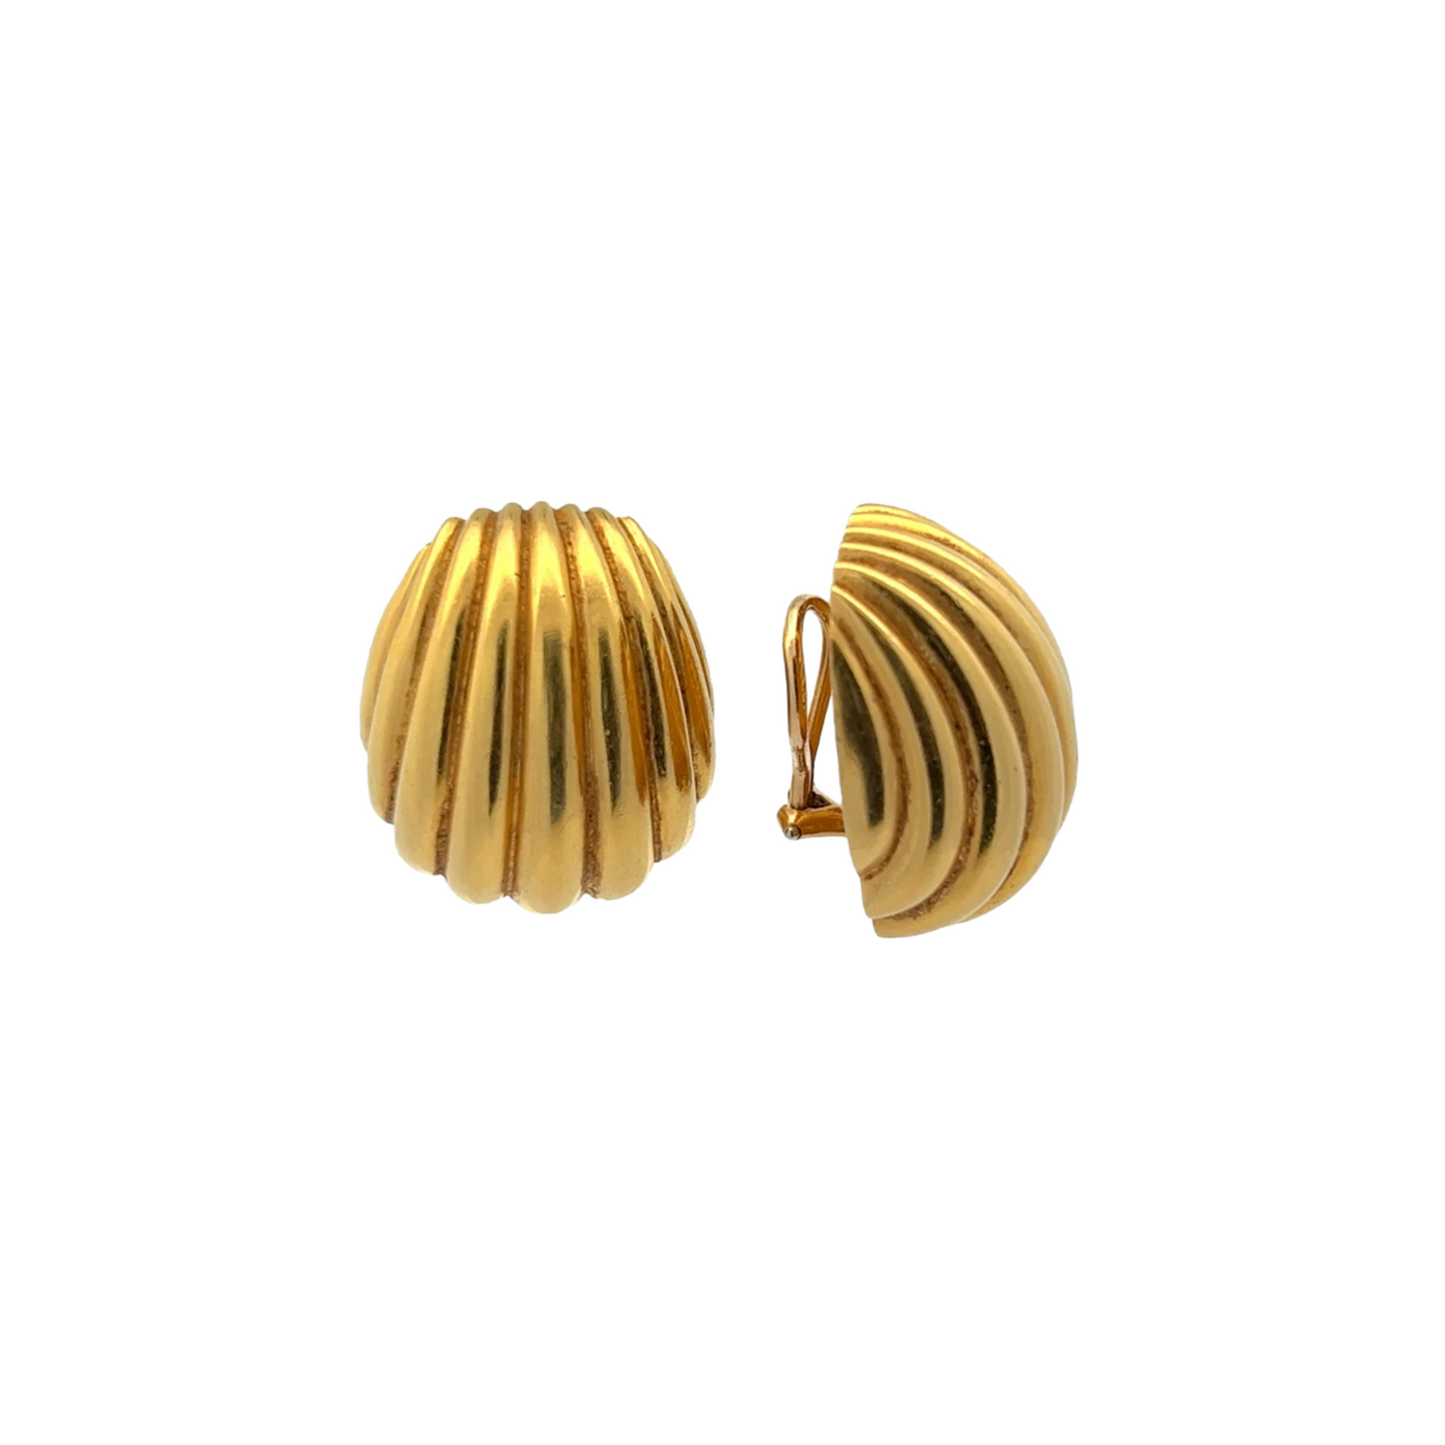 1980s 18KT Yellow Gold Earrings front and side